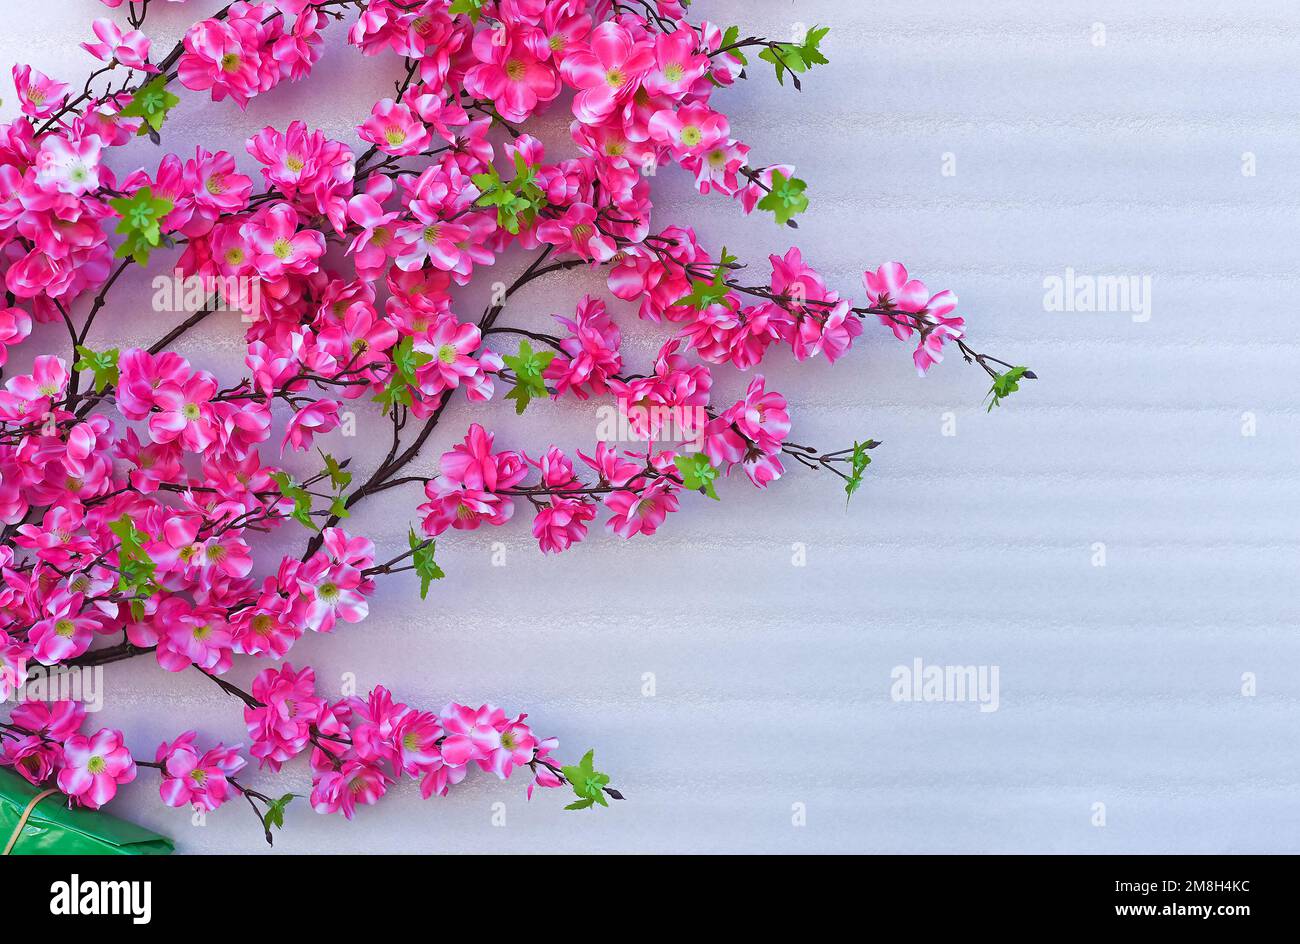 Pink flowers decoration for Tet Lunar New Year Stock Photo